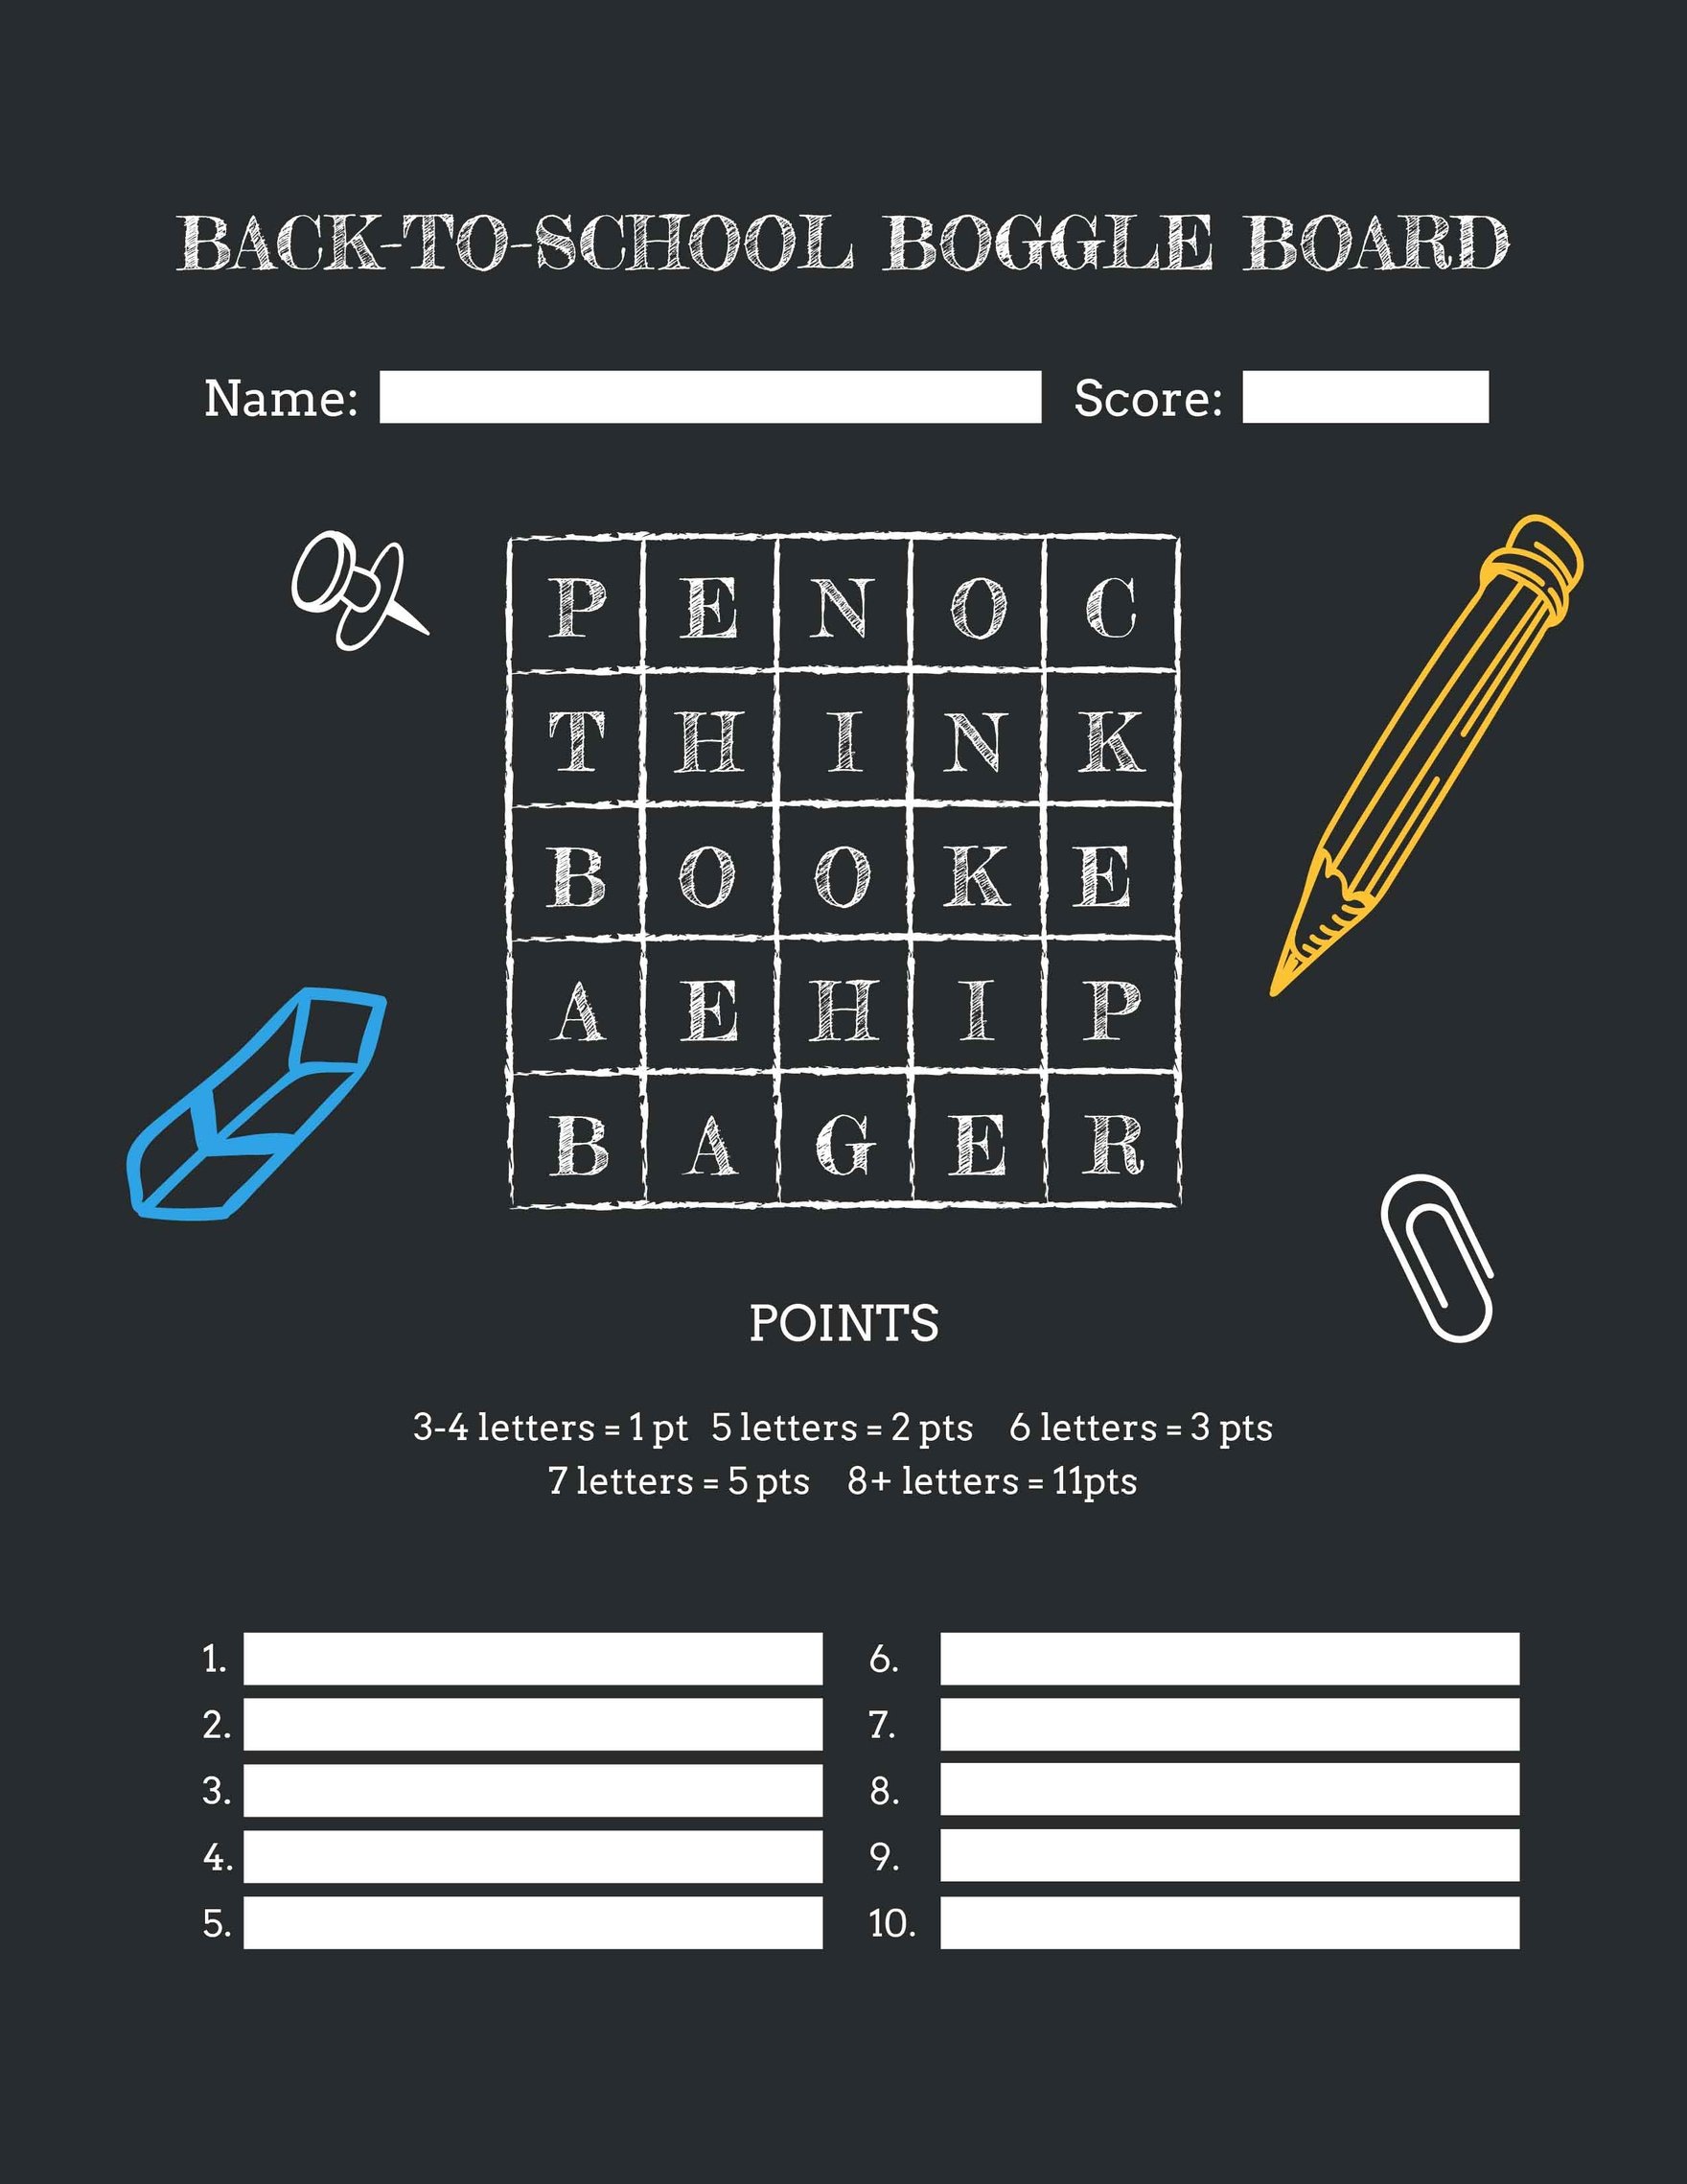 Back-to-School Boggle Board Template in Word, Google Docs, PDF, Apple Pages